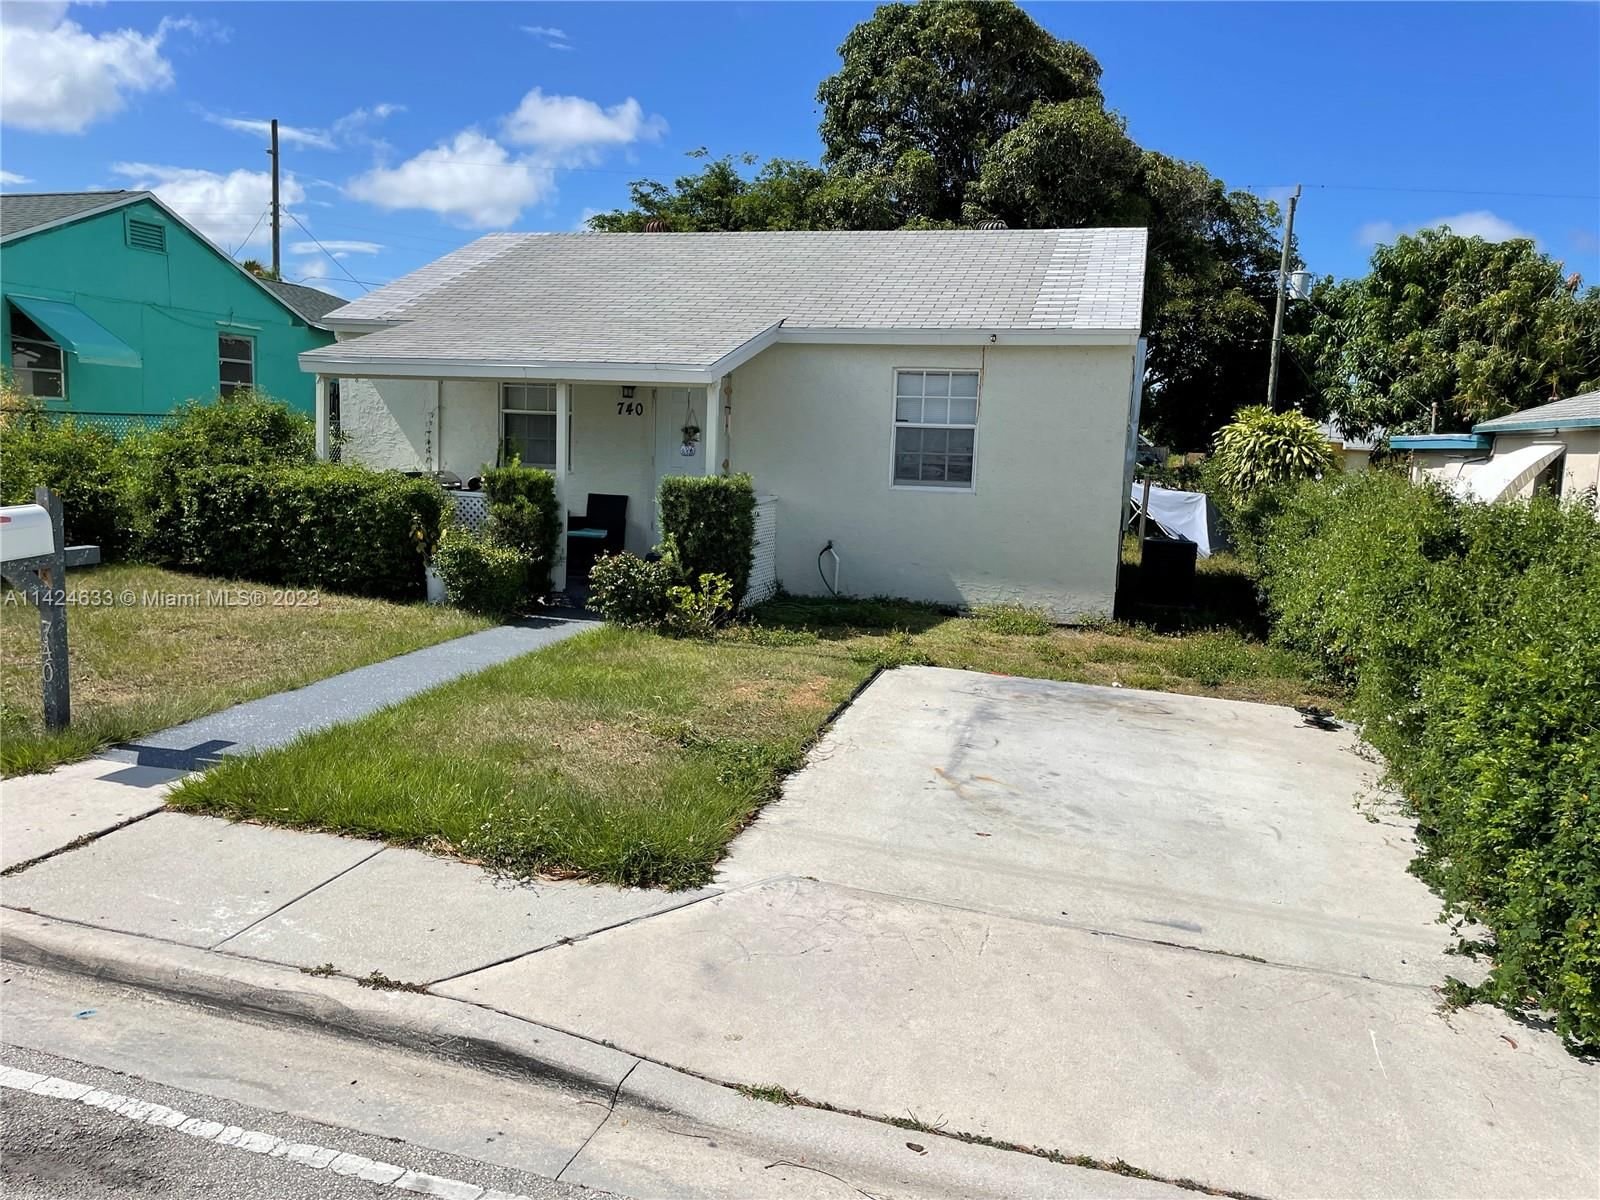 Real estate property located at 740 Fourth St, Palm Beach County, RIVIERA BEACH HEIGHTS ADD, Riviera Beach, FL